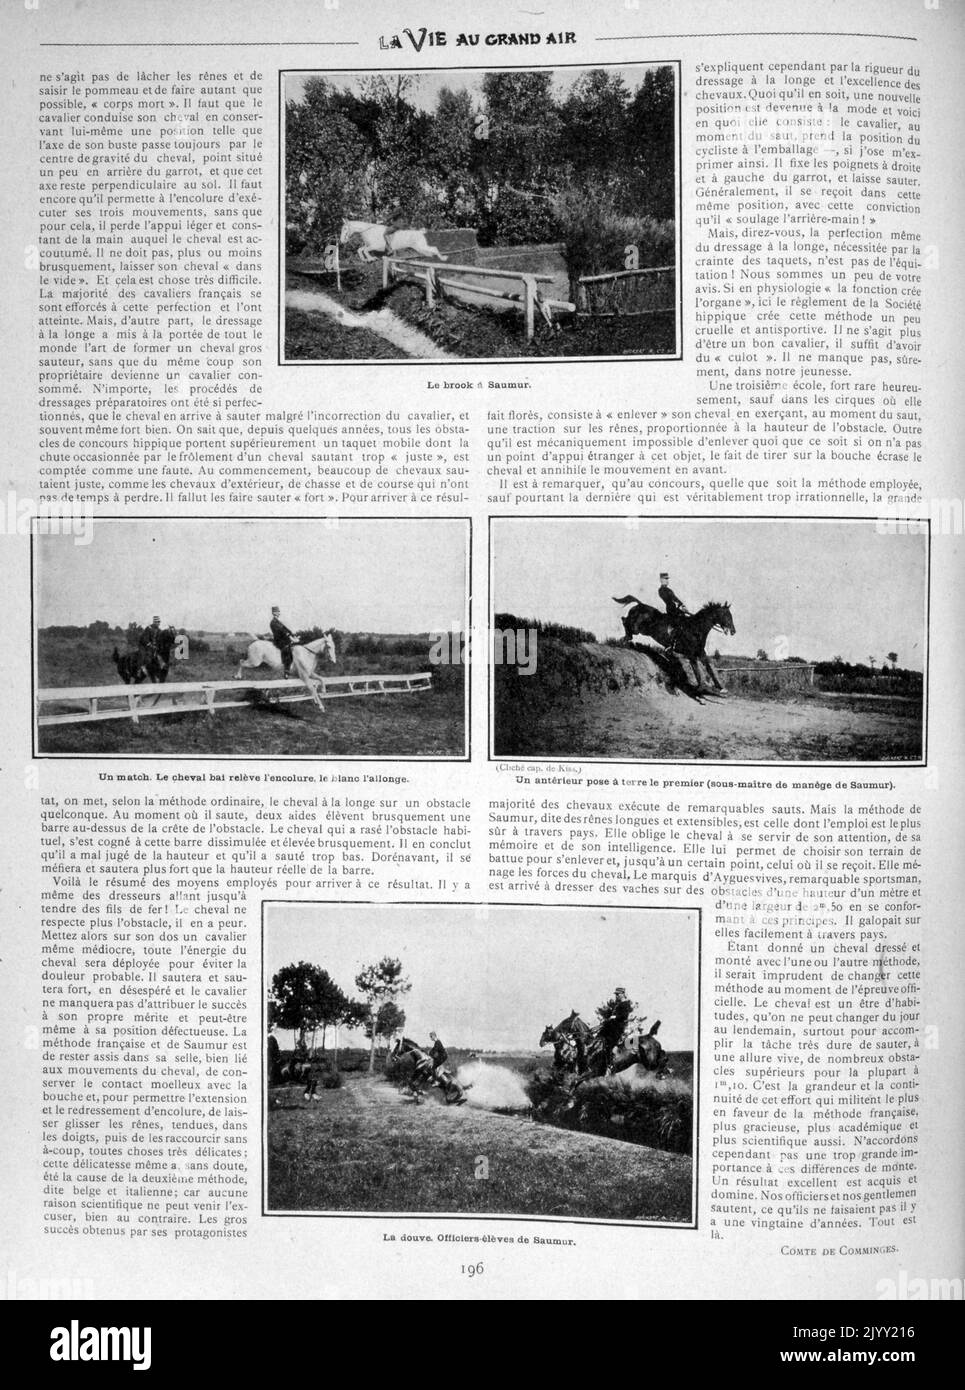 Vintage French photographs showing army dressage and equestrian practice 1902 Stock Photo